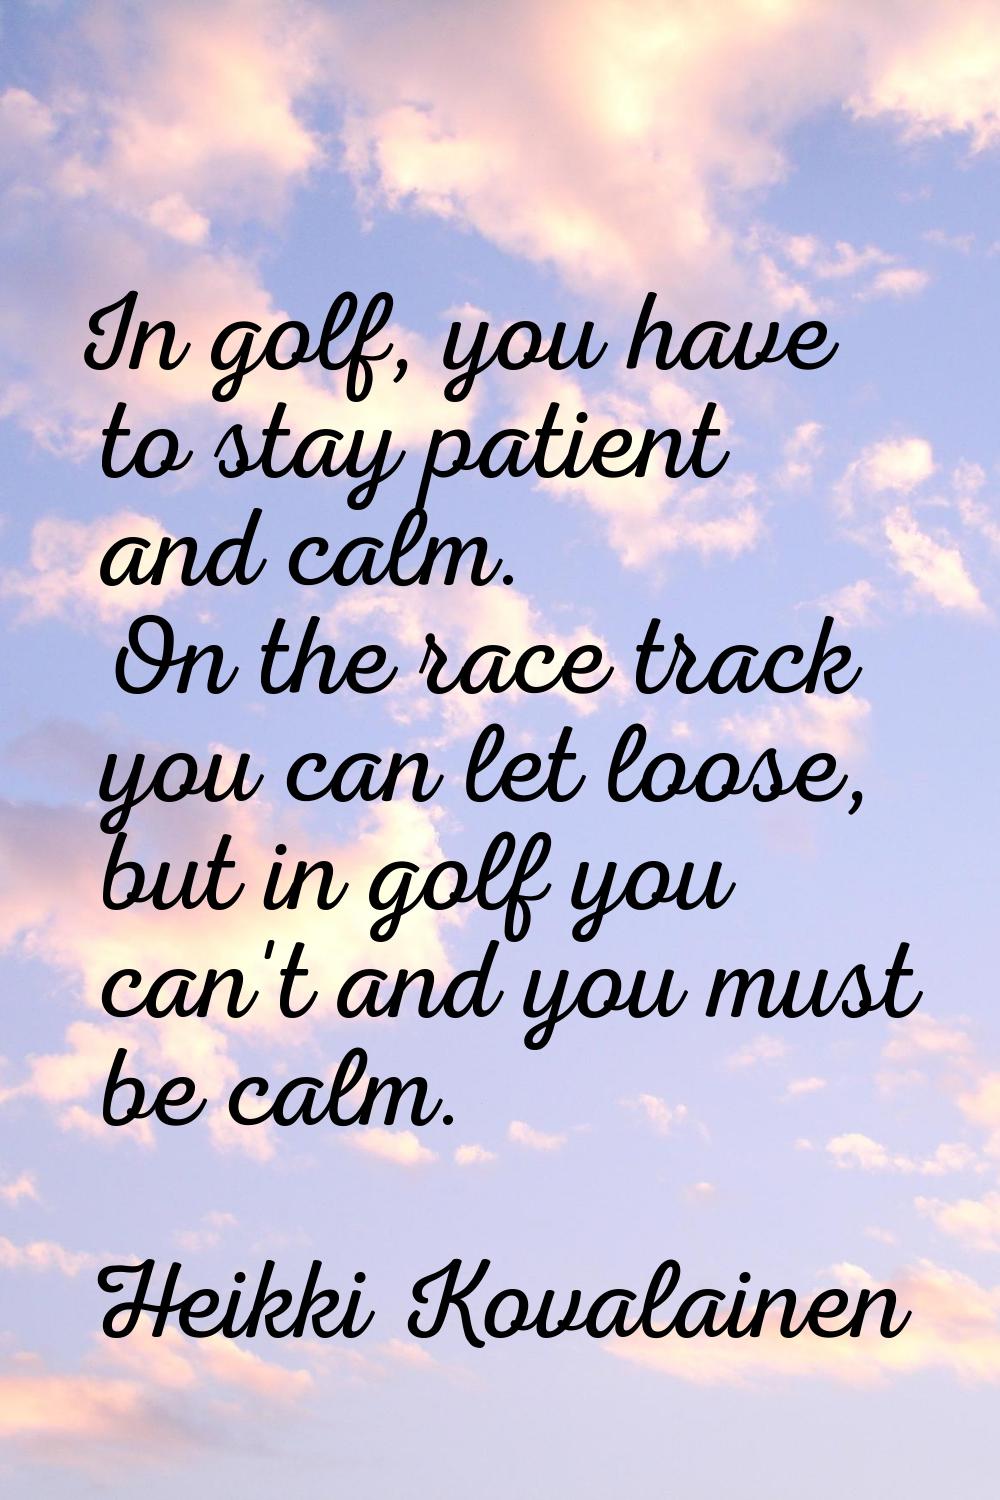 In golf, you have to stay patient and calm. On the race track you can let loose, but in golf you ca